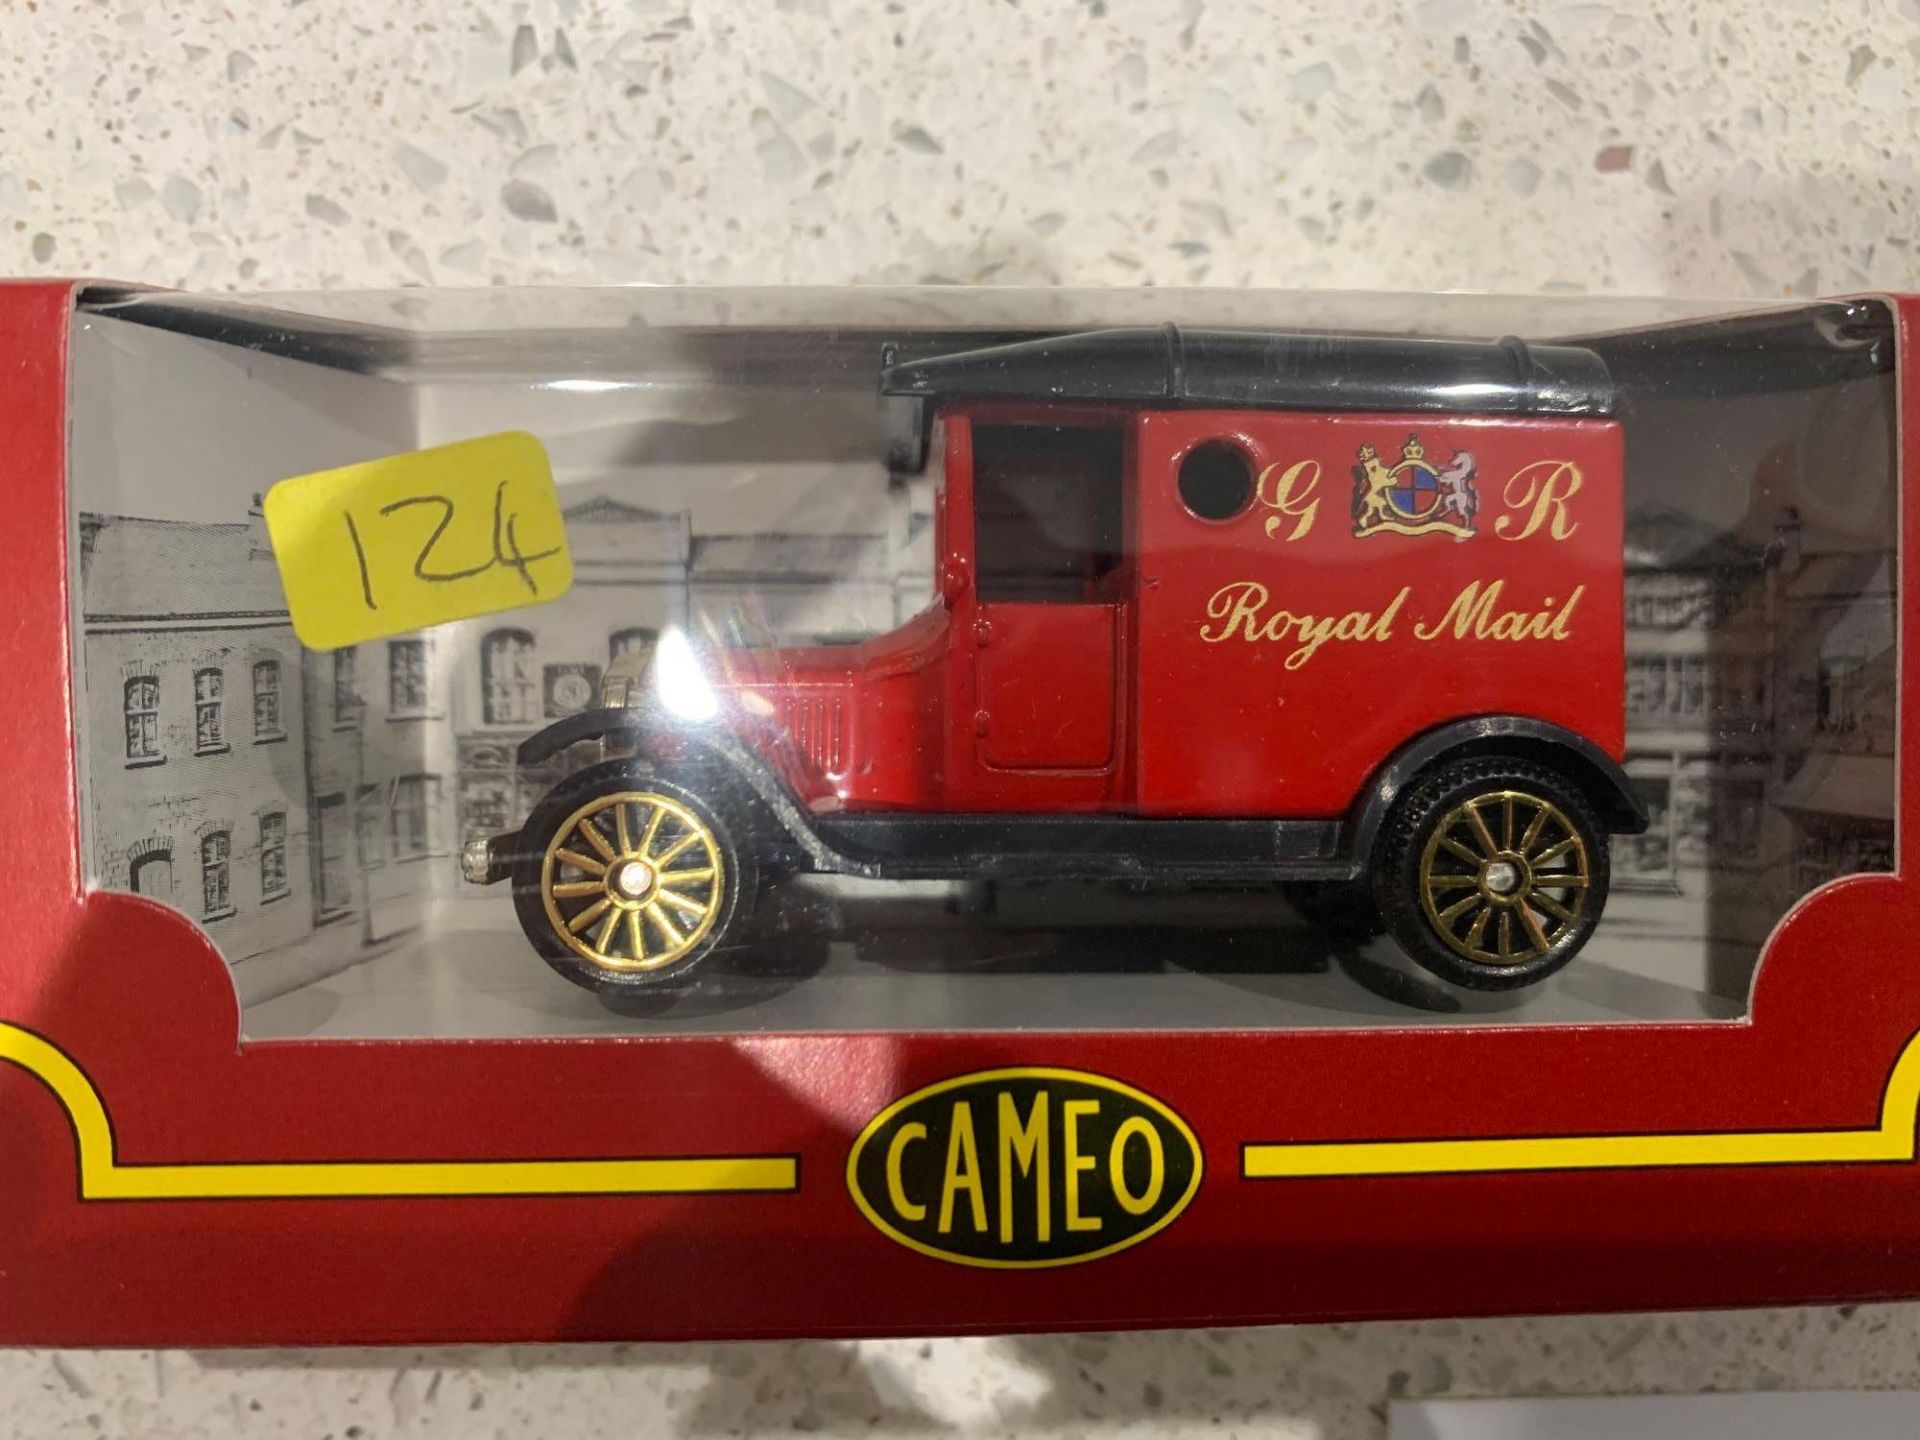 2 X Cameo Trucks 2 X King George Royal Mail Marked Vehicles Truck And Van - Image 2 of 6